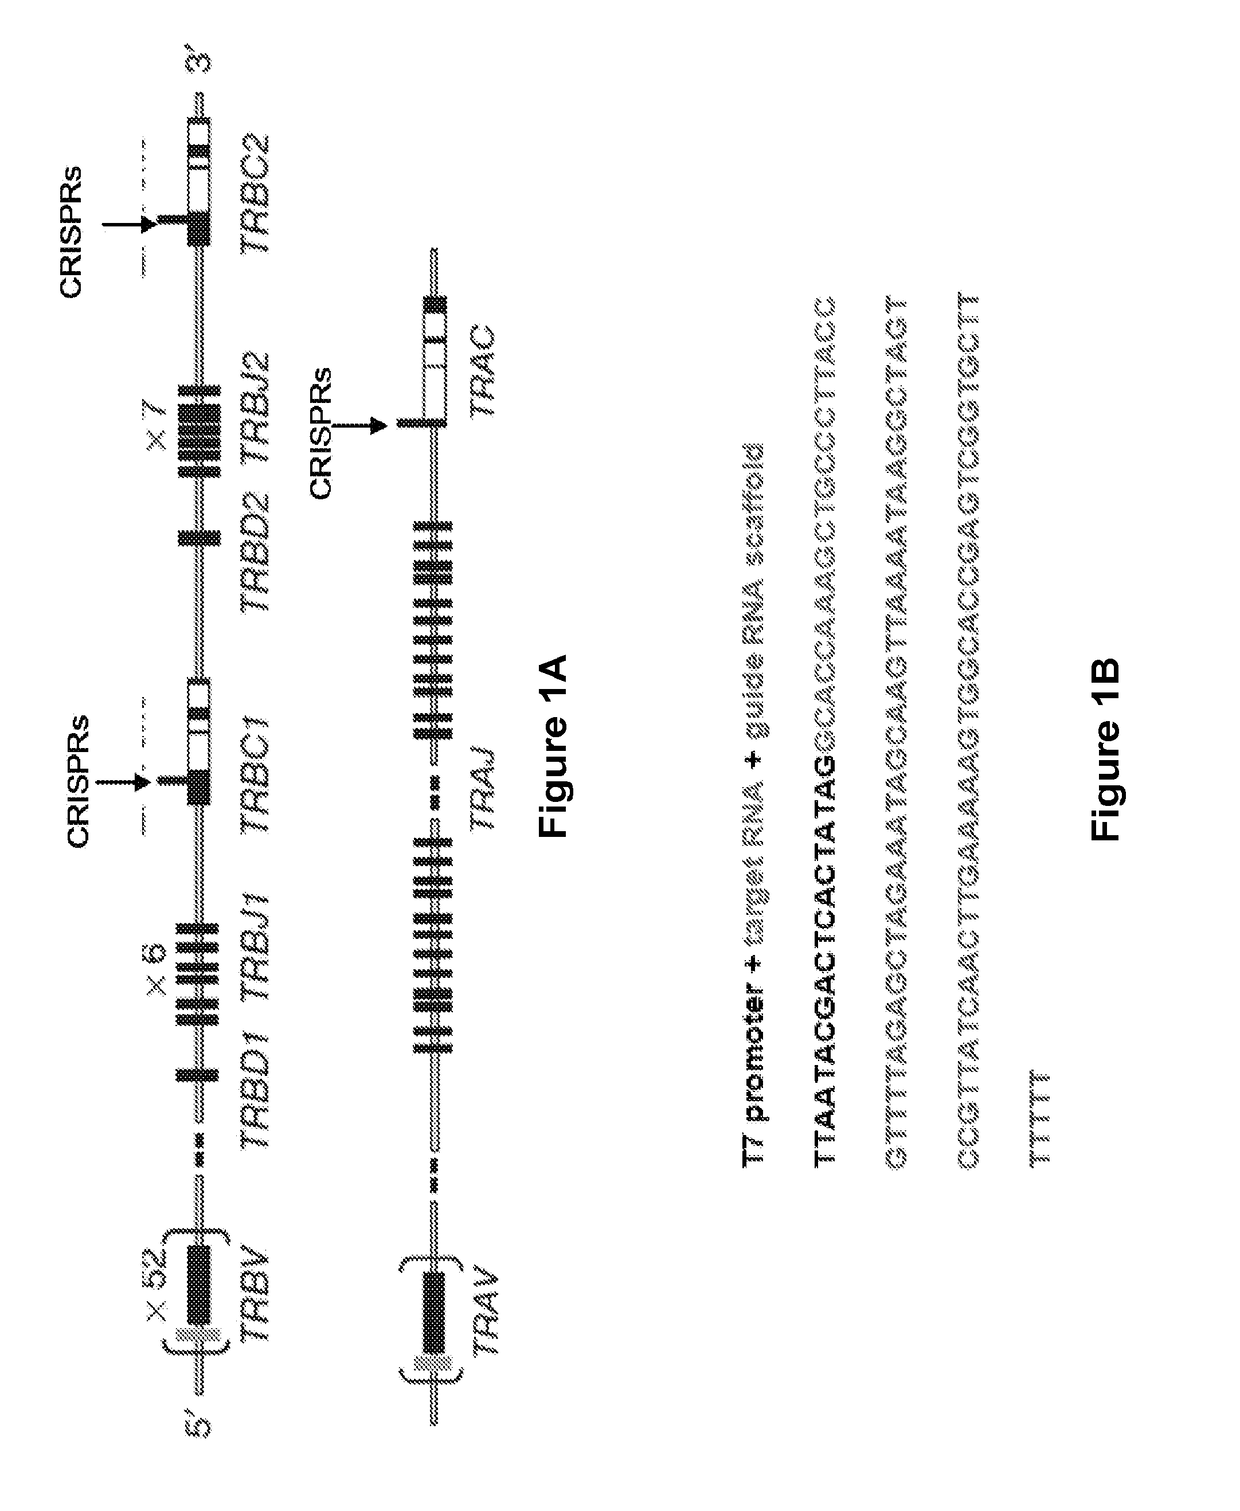 Altering Gene Expression in CART Cells and Uses Thereof